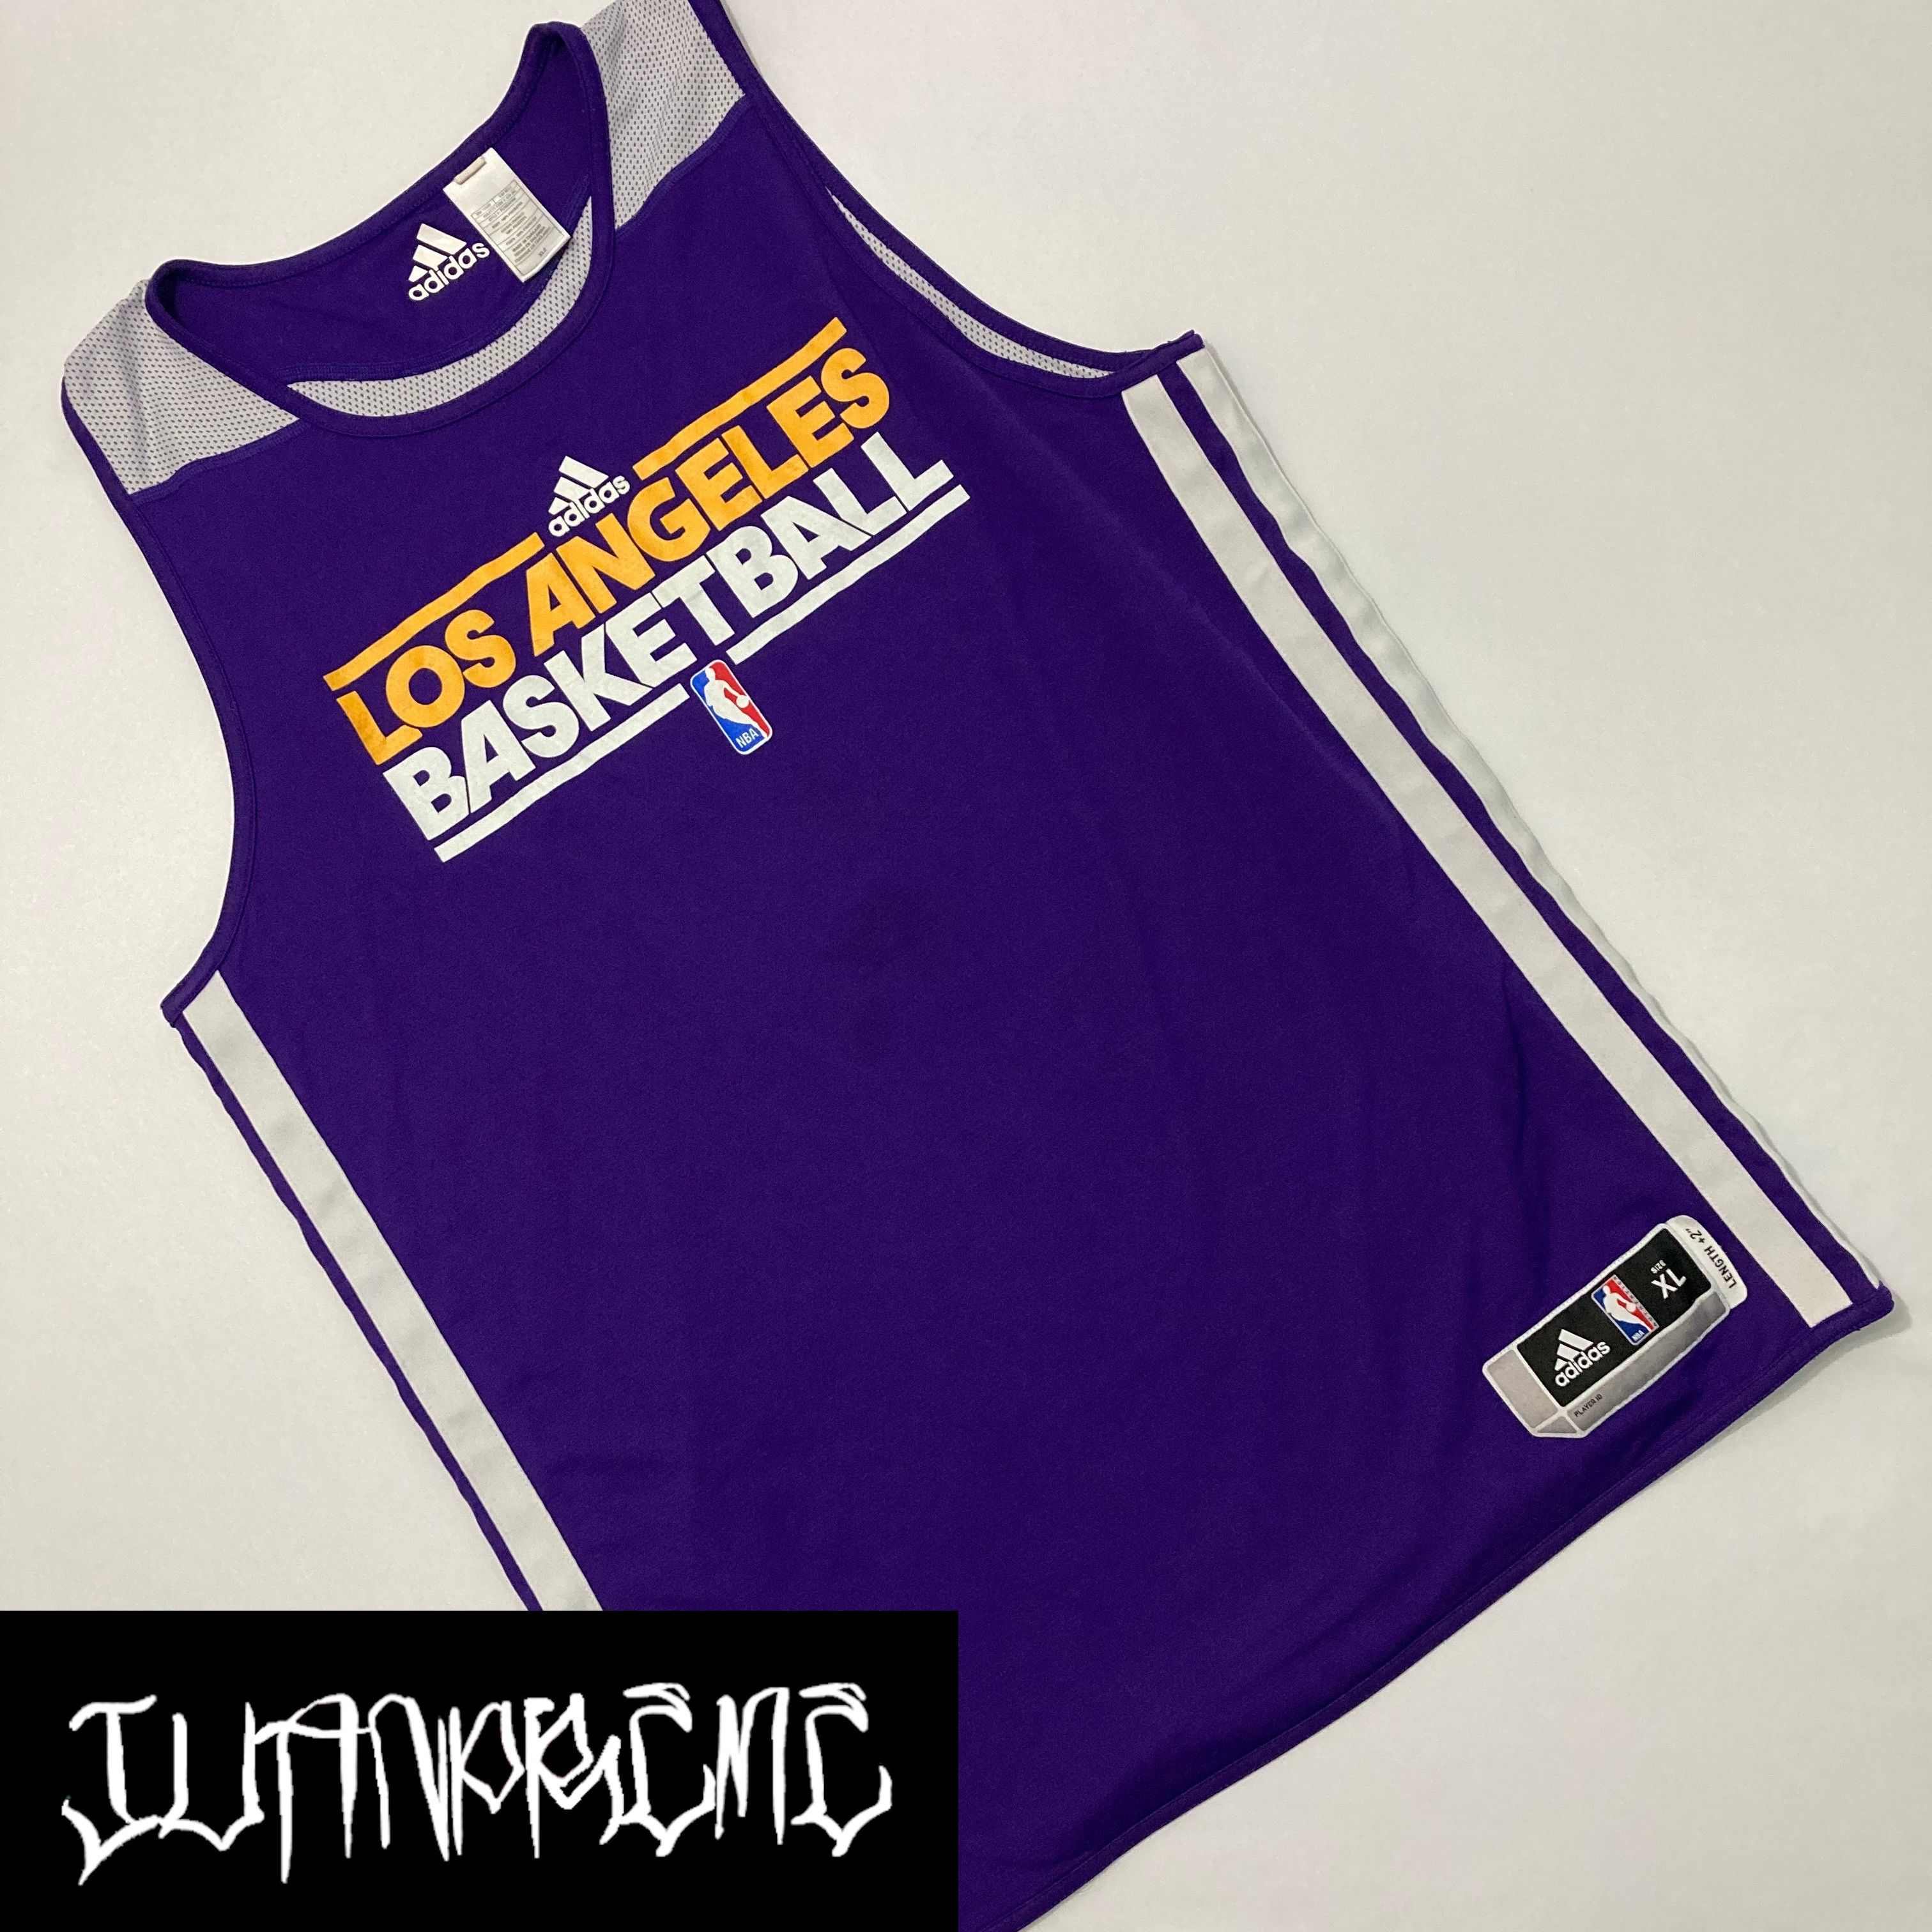 adidas lakers practice jersey